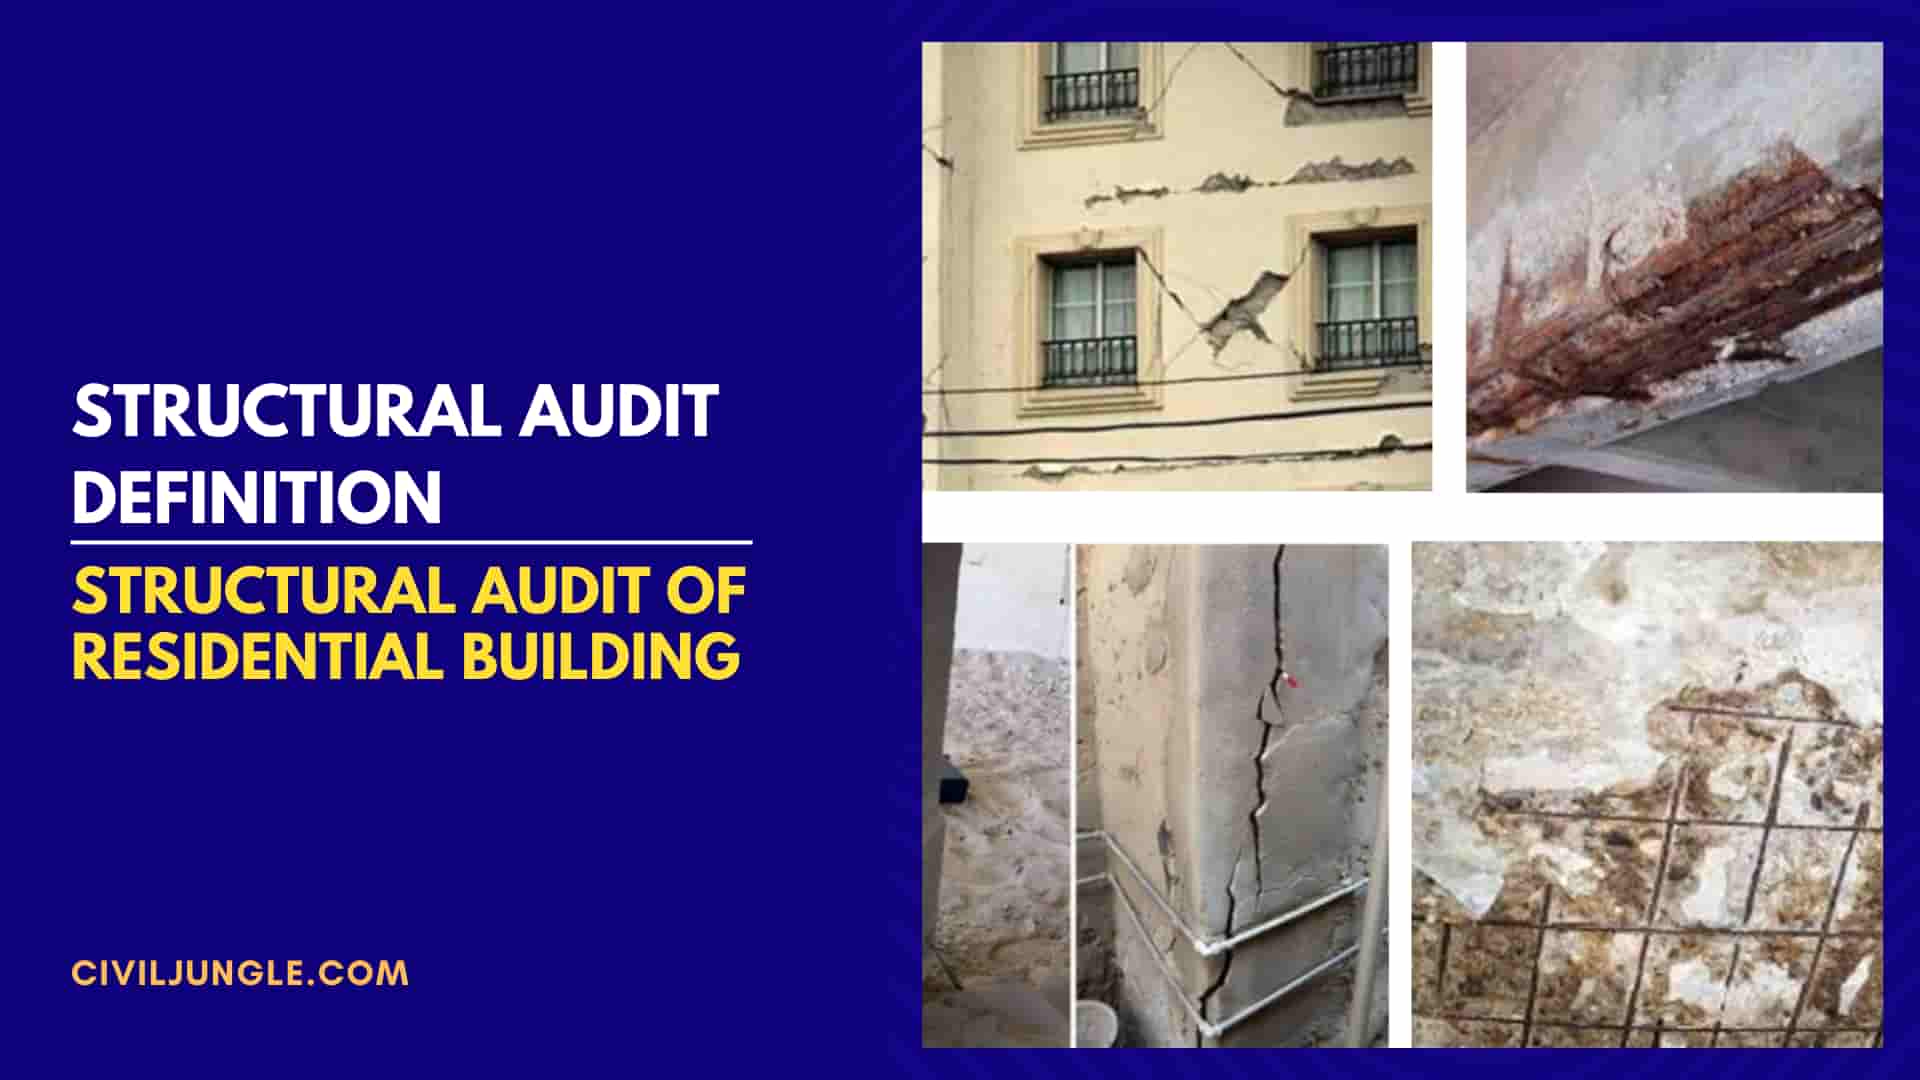 Structural Audit Definition | Structural Audit of Residential Building